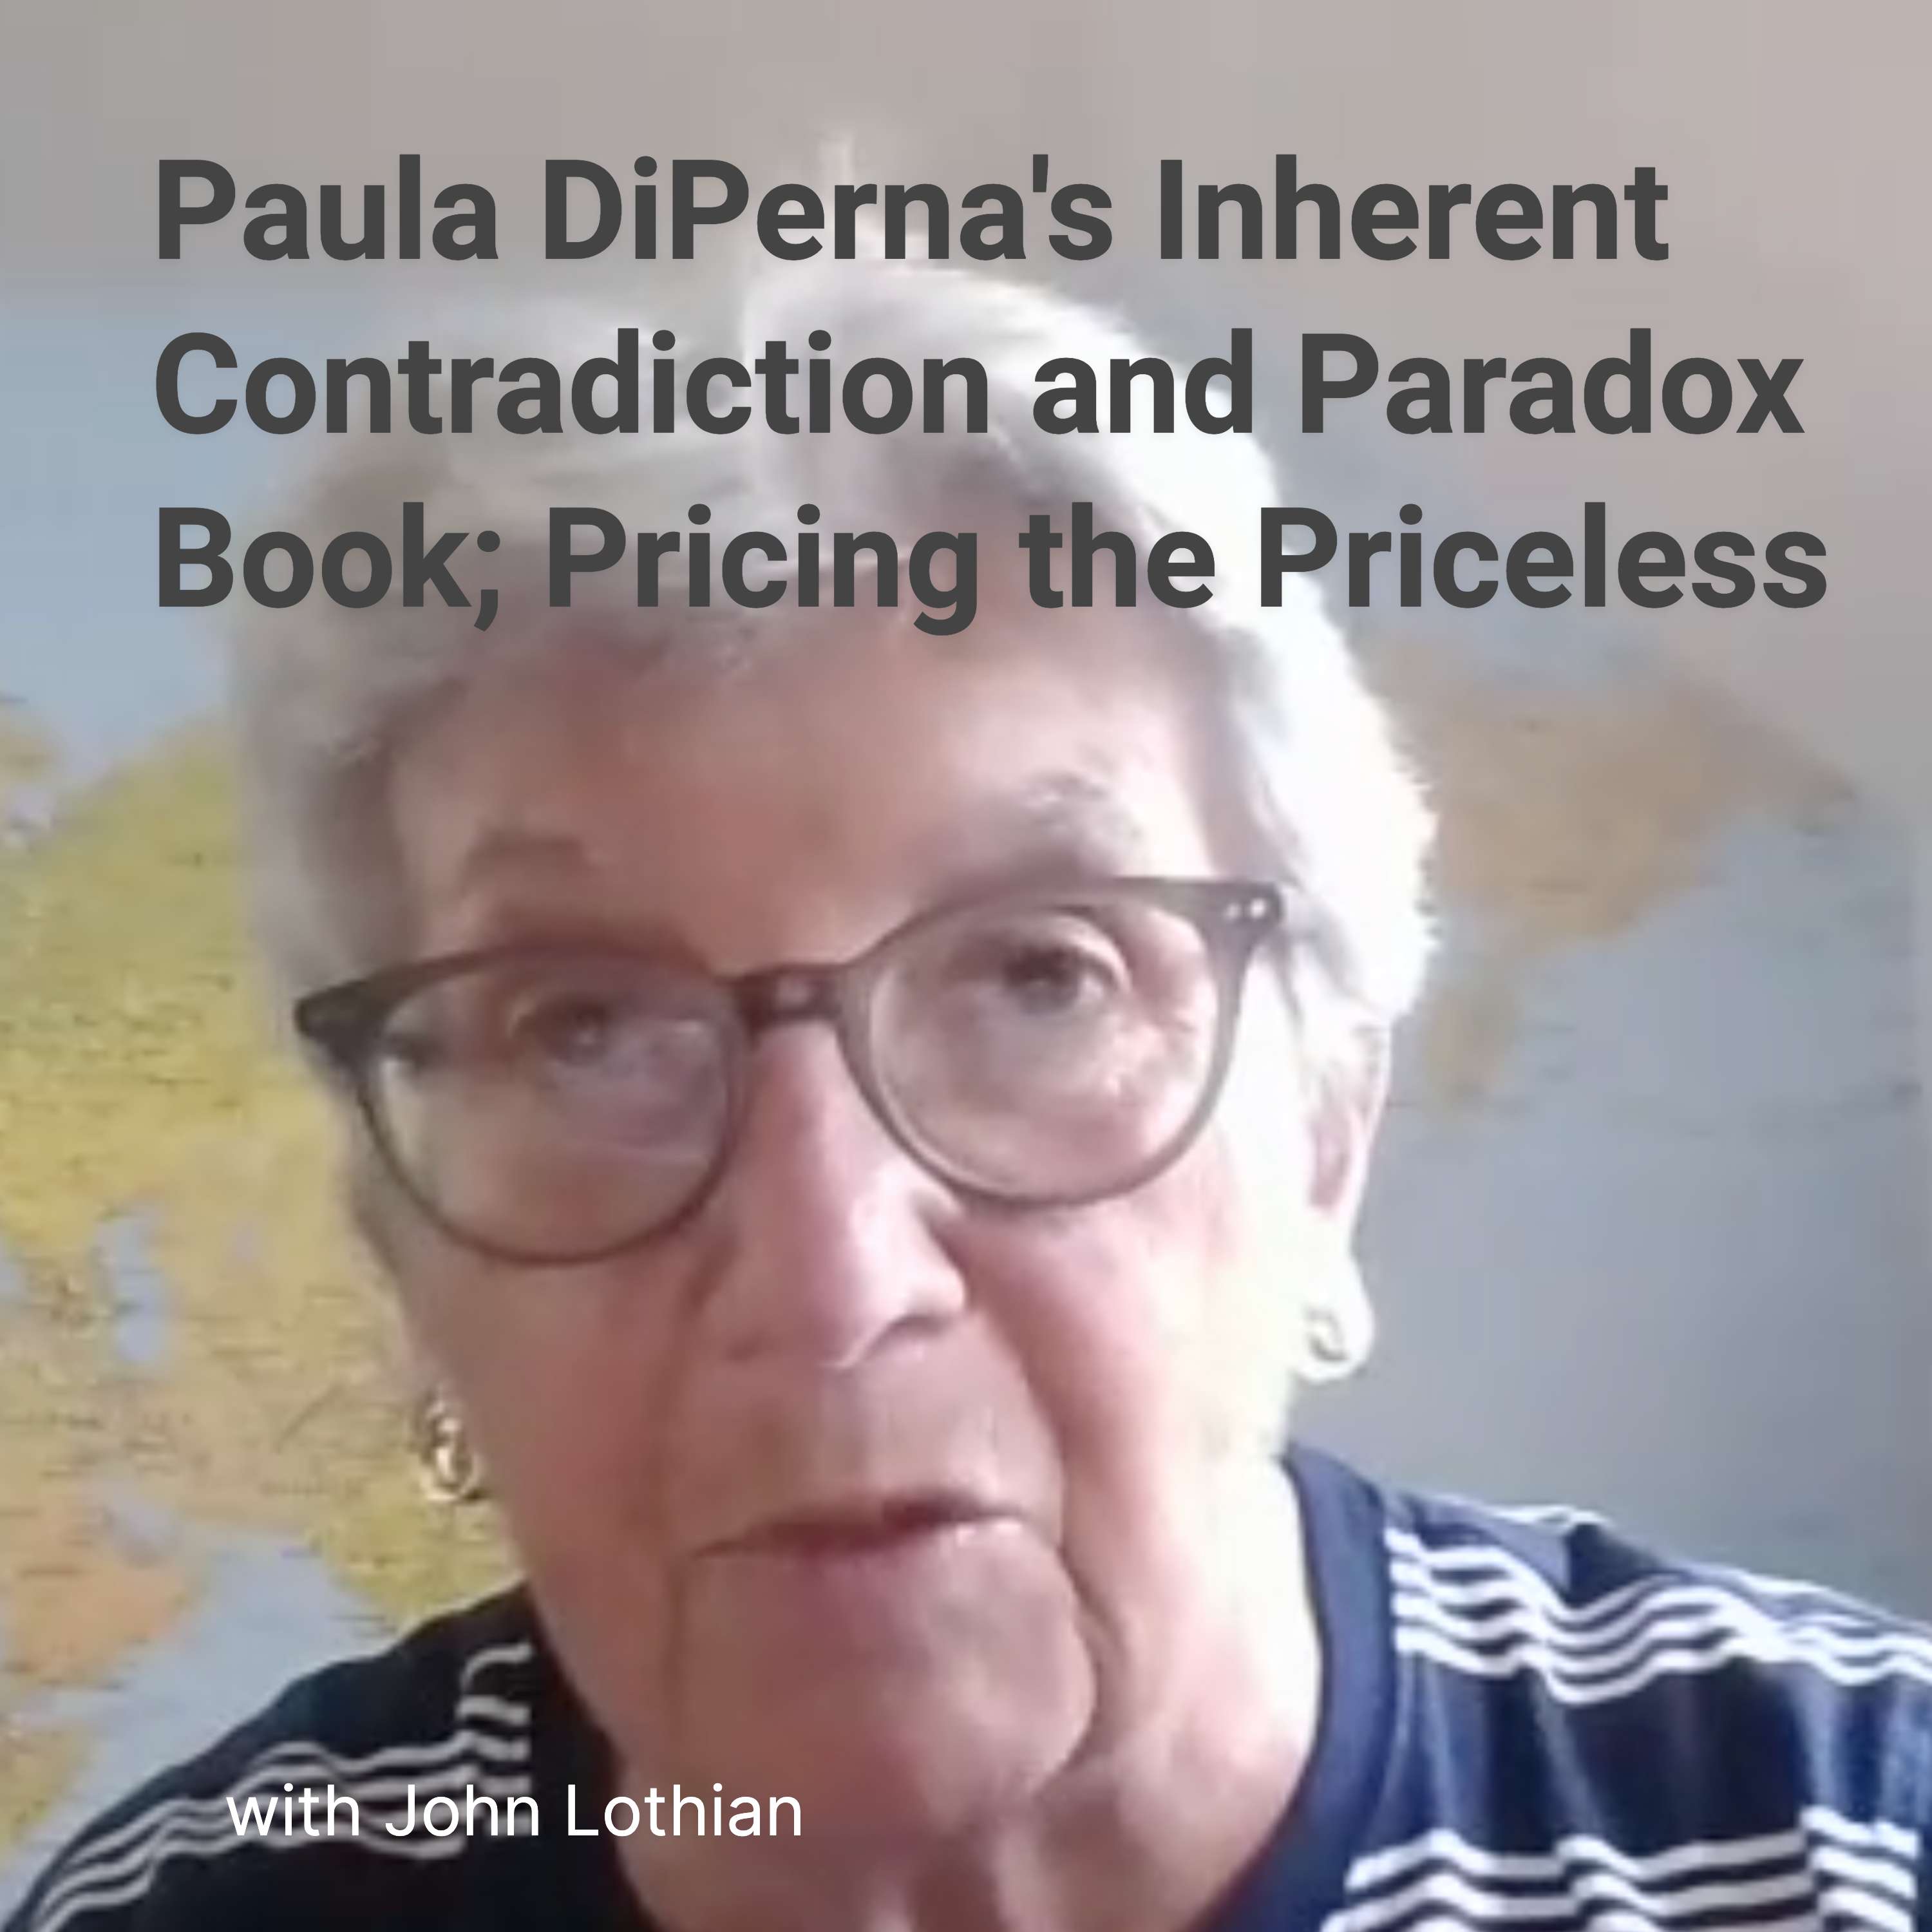 Paula DiPerna's Inherent Contradiction and Paradox Book: Pricing the Priceless